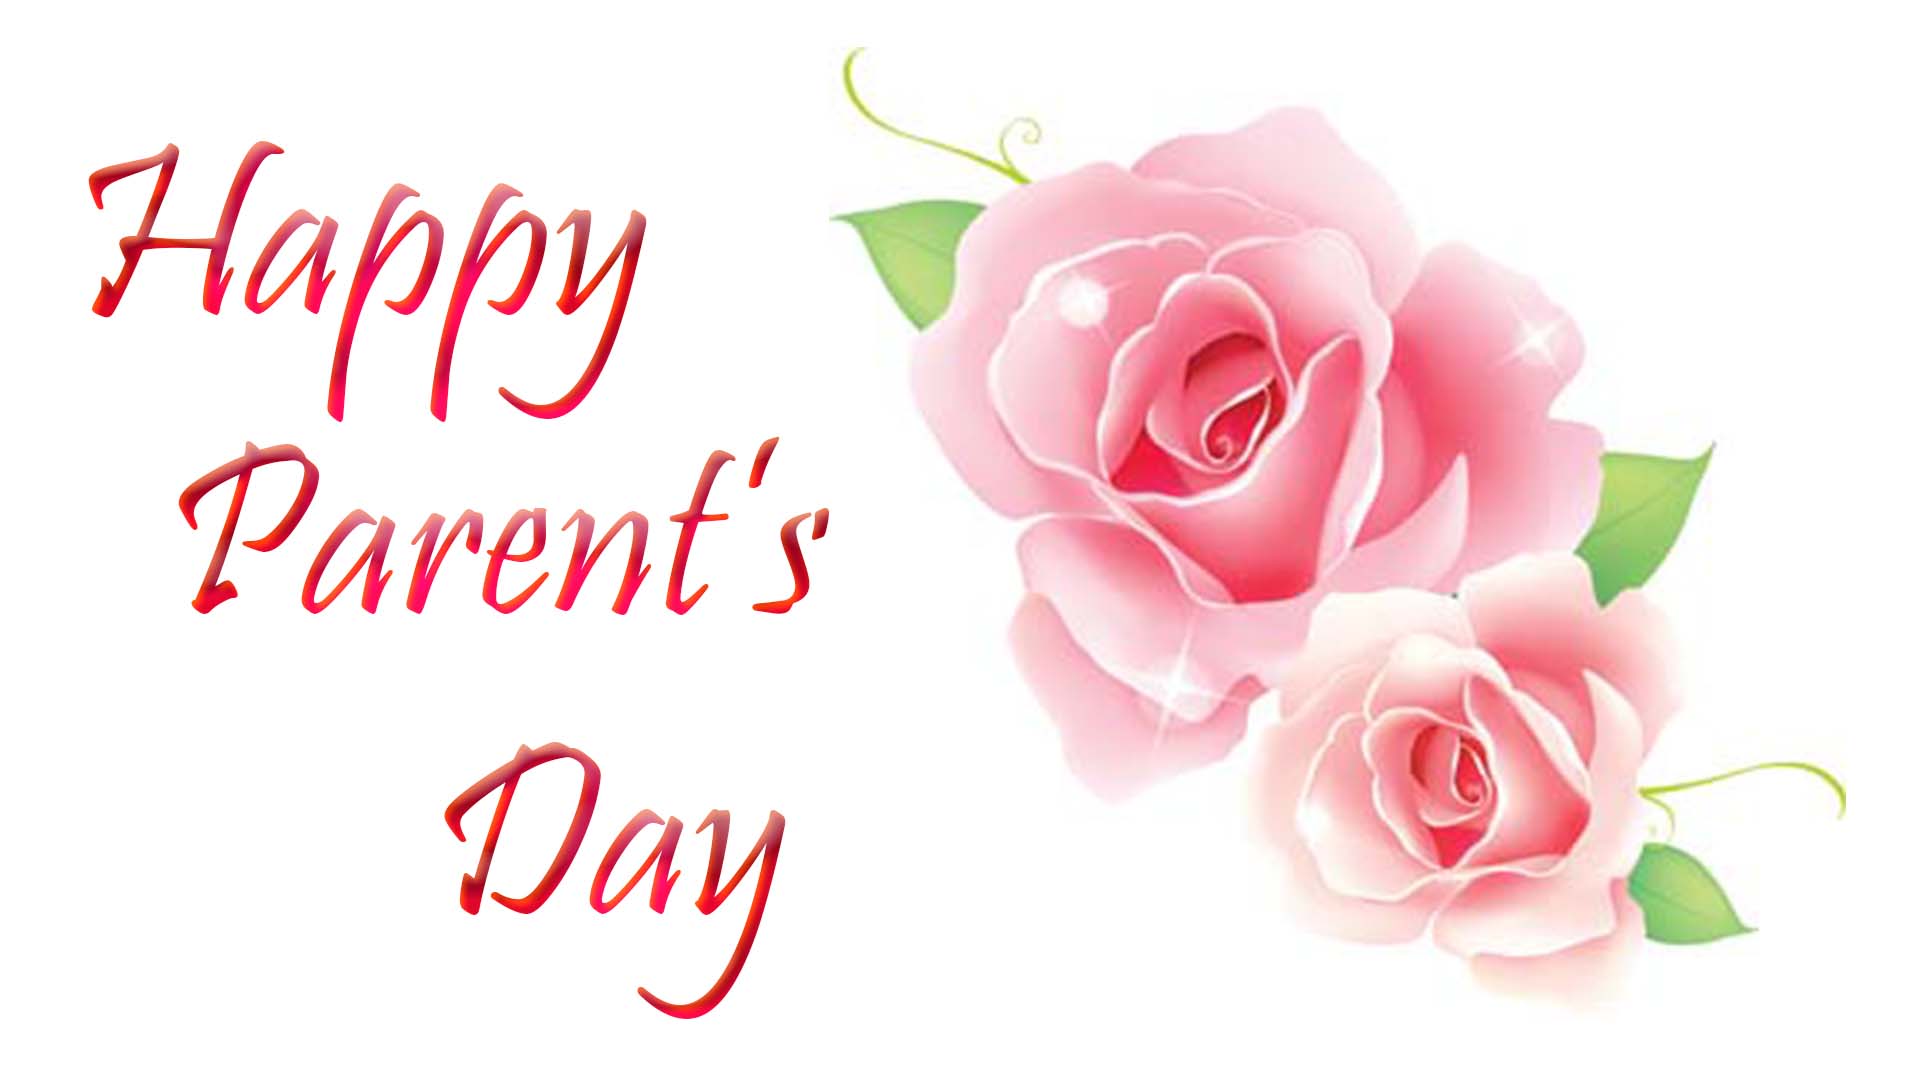 Happy Parents Day Images & HD Pictures Global Day of Parents